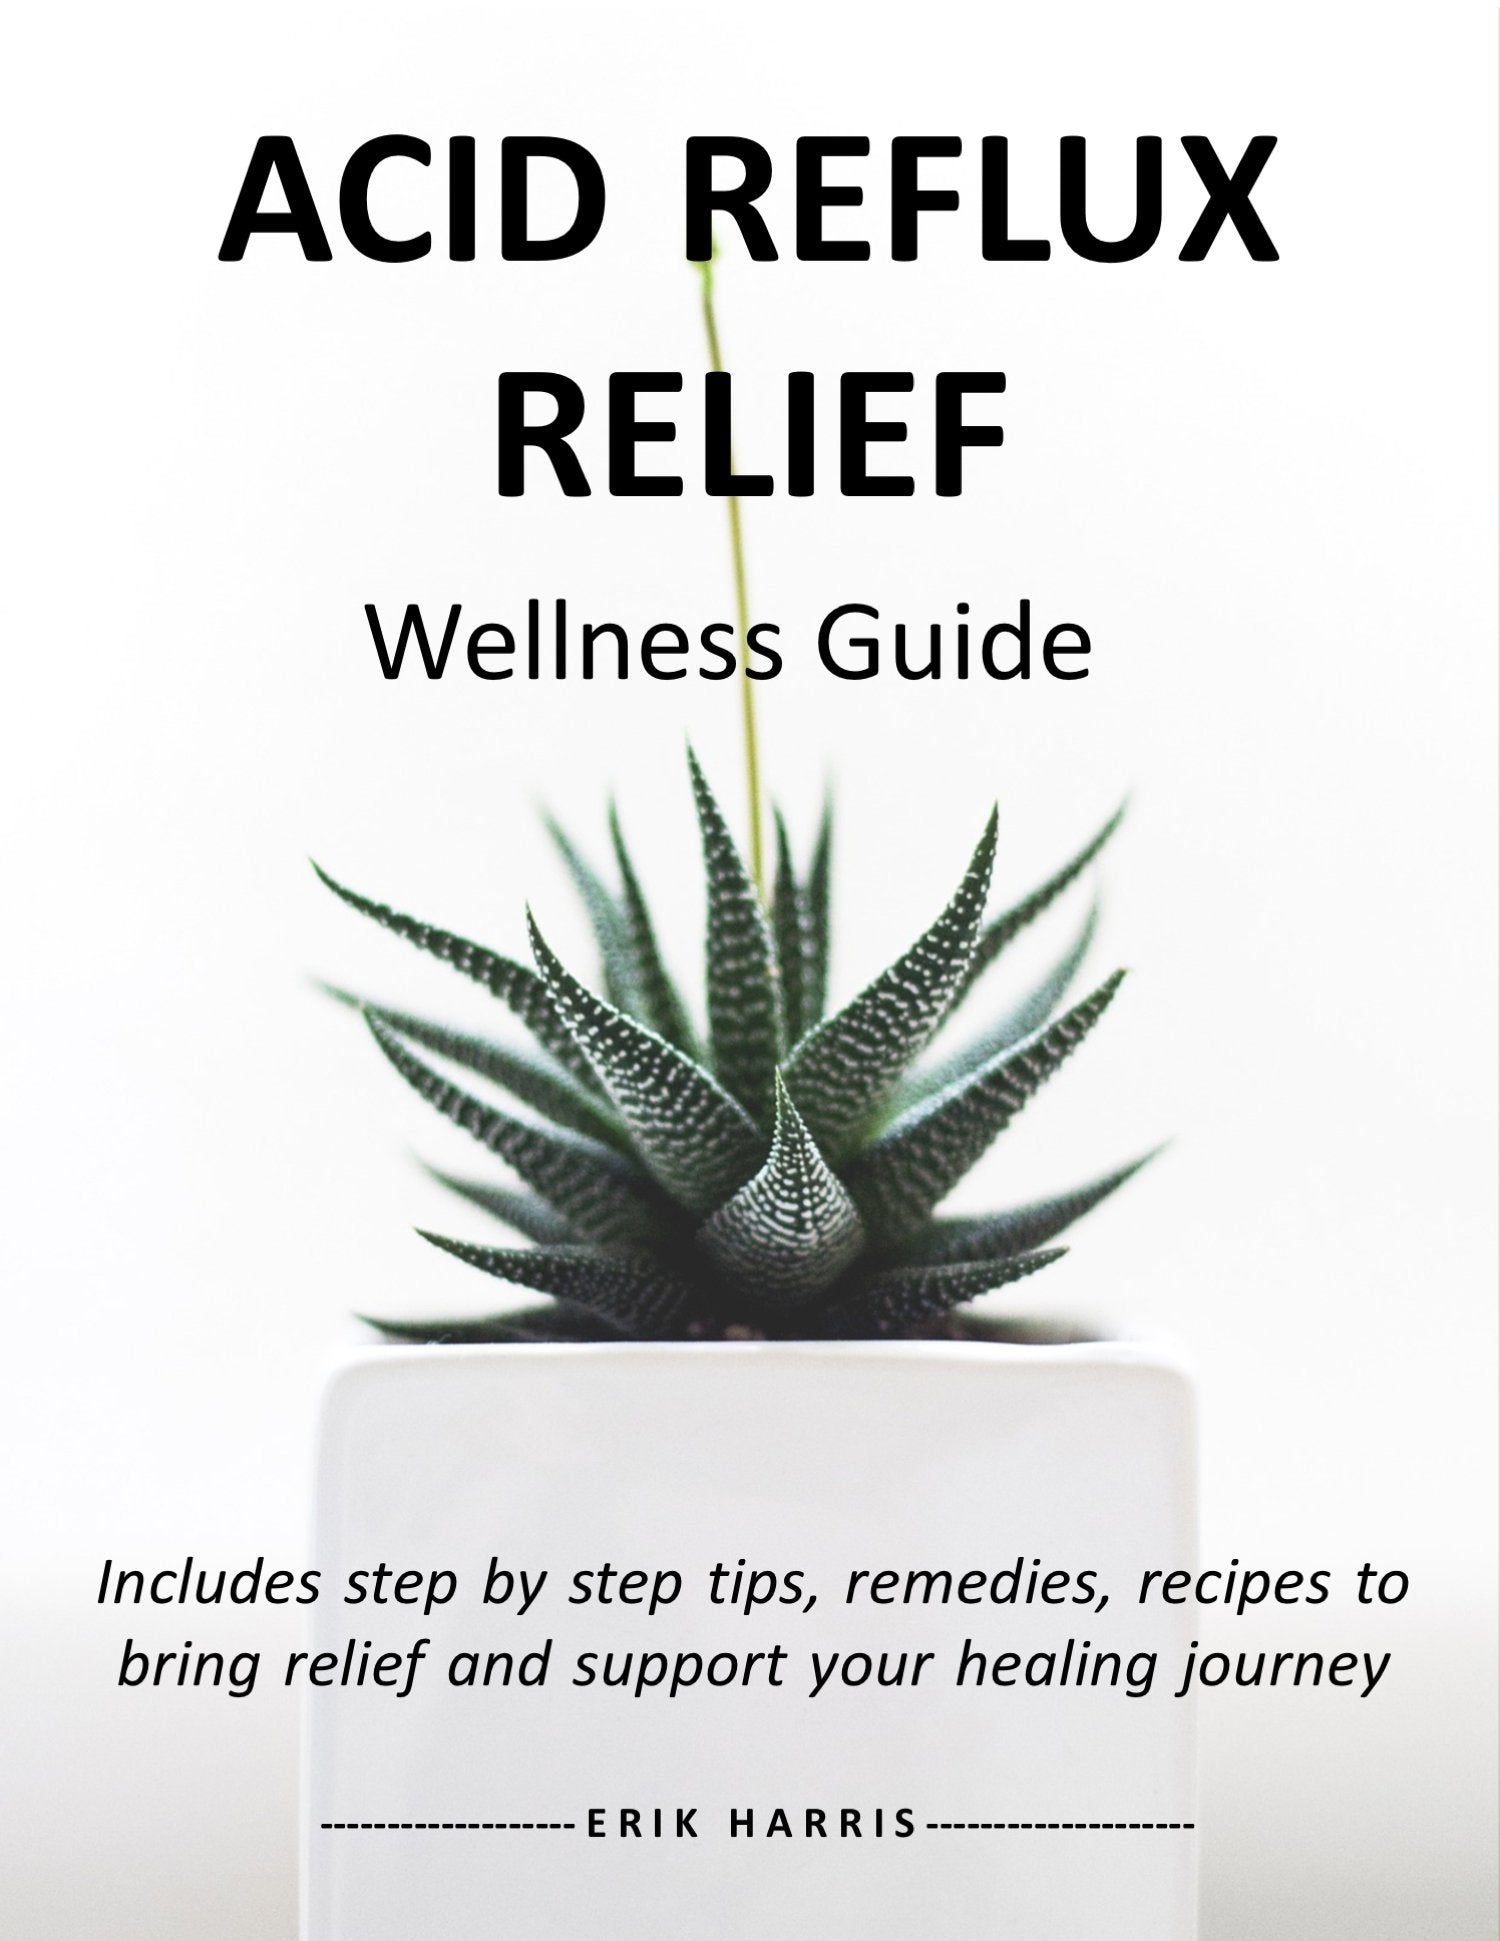 ACID REFLUX RELIEF - WELLNESS GUIDE - Chi for Healing